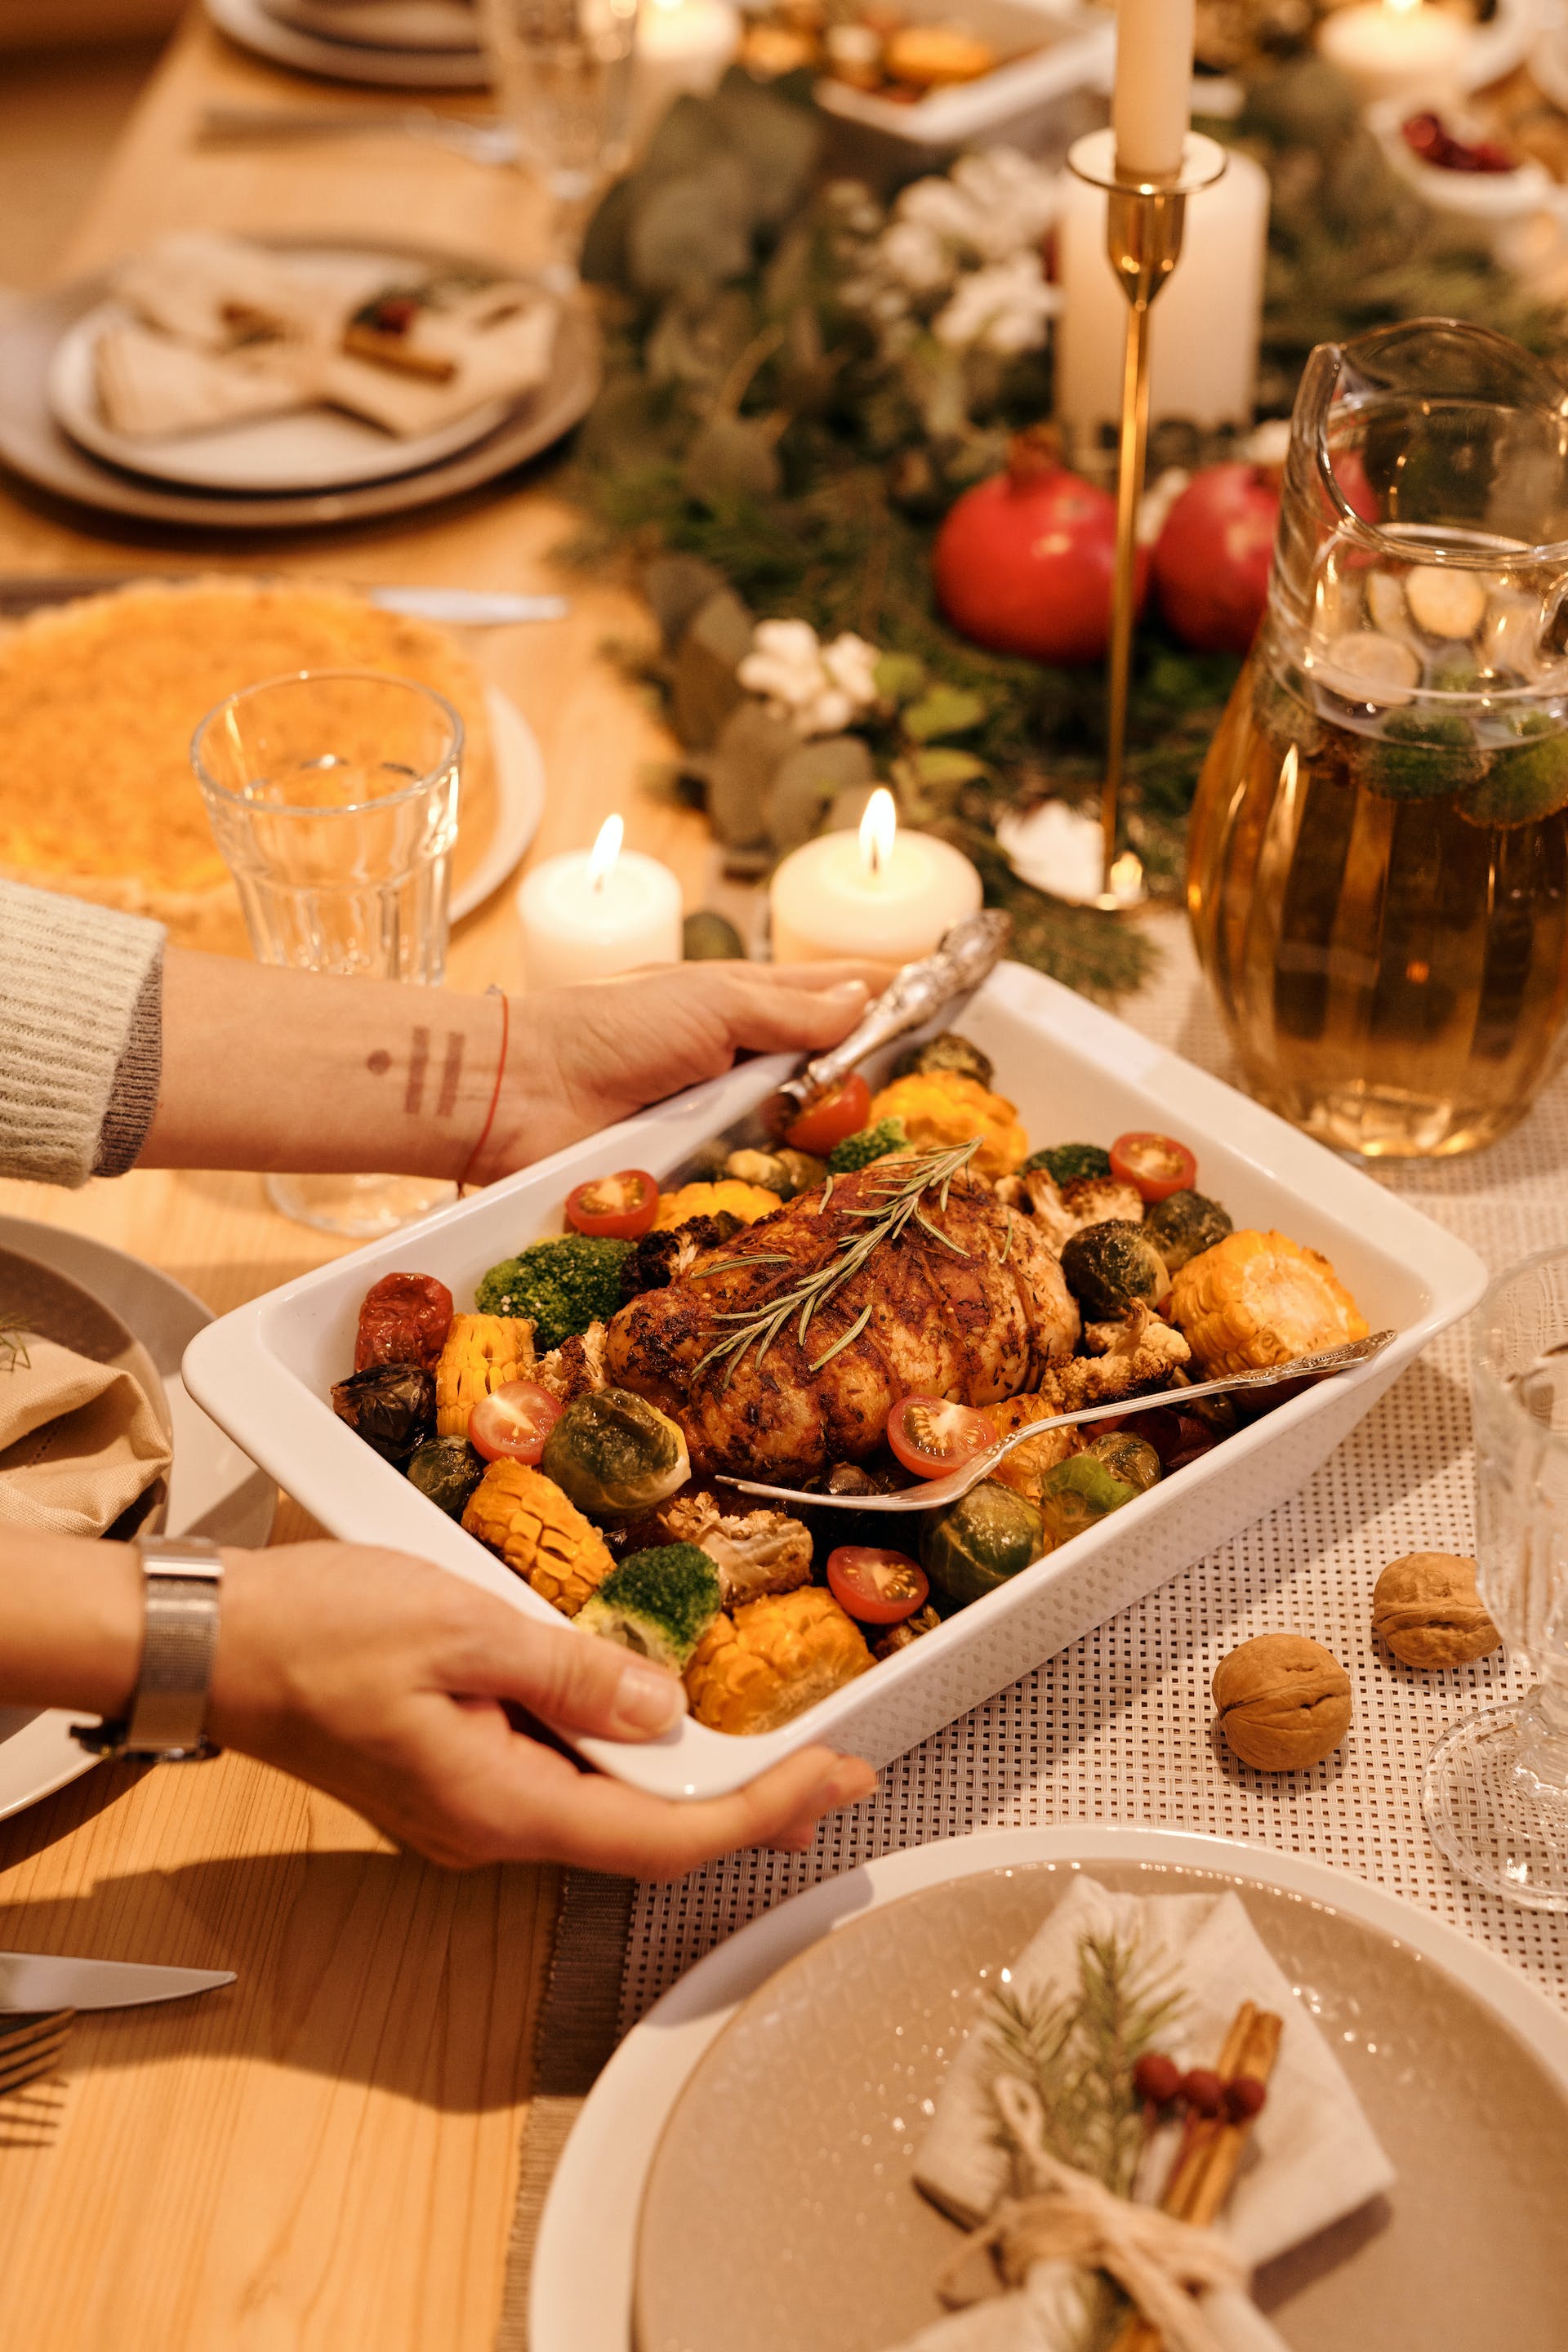 A person serving home-made food on Christmas dinner | Source: Pexels